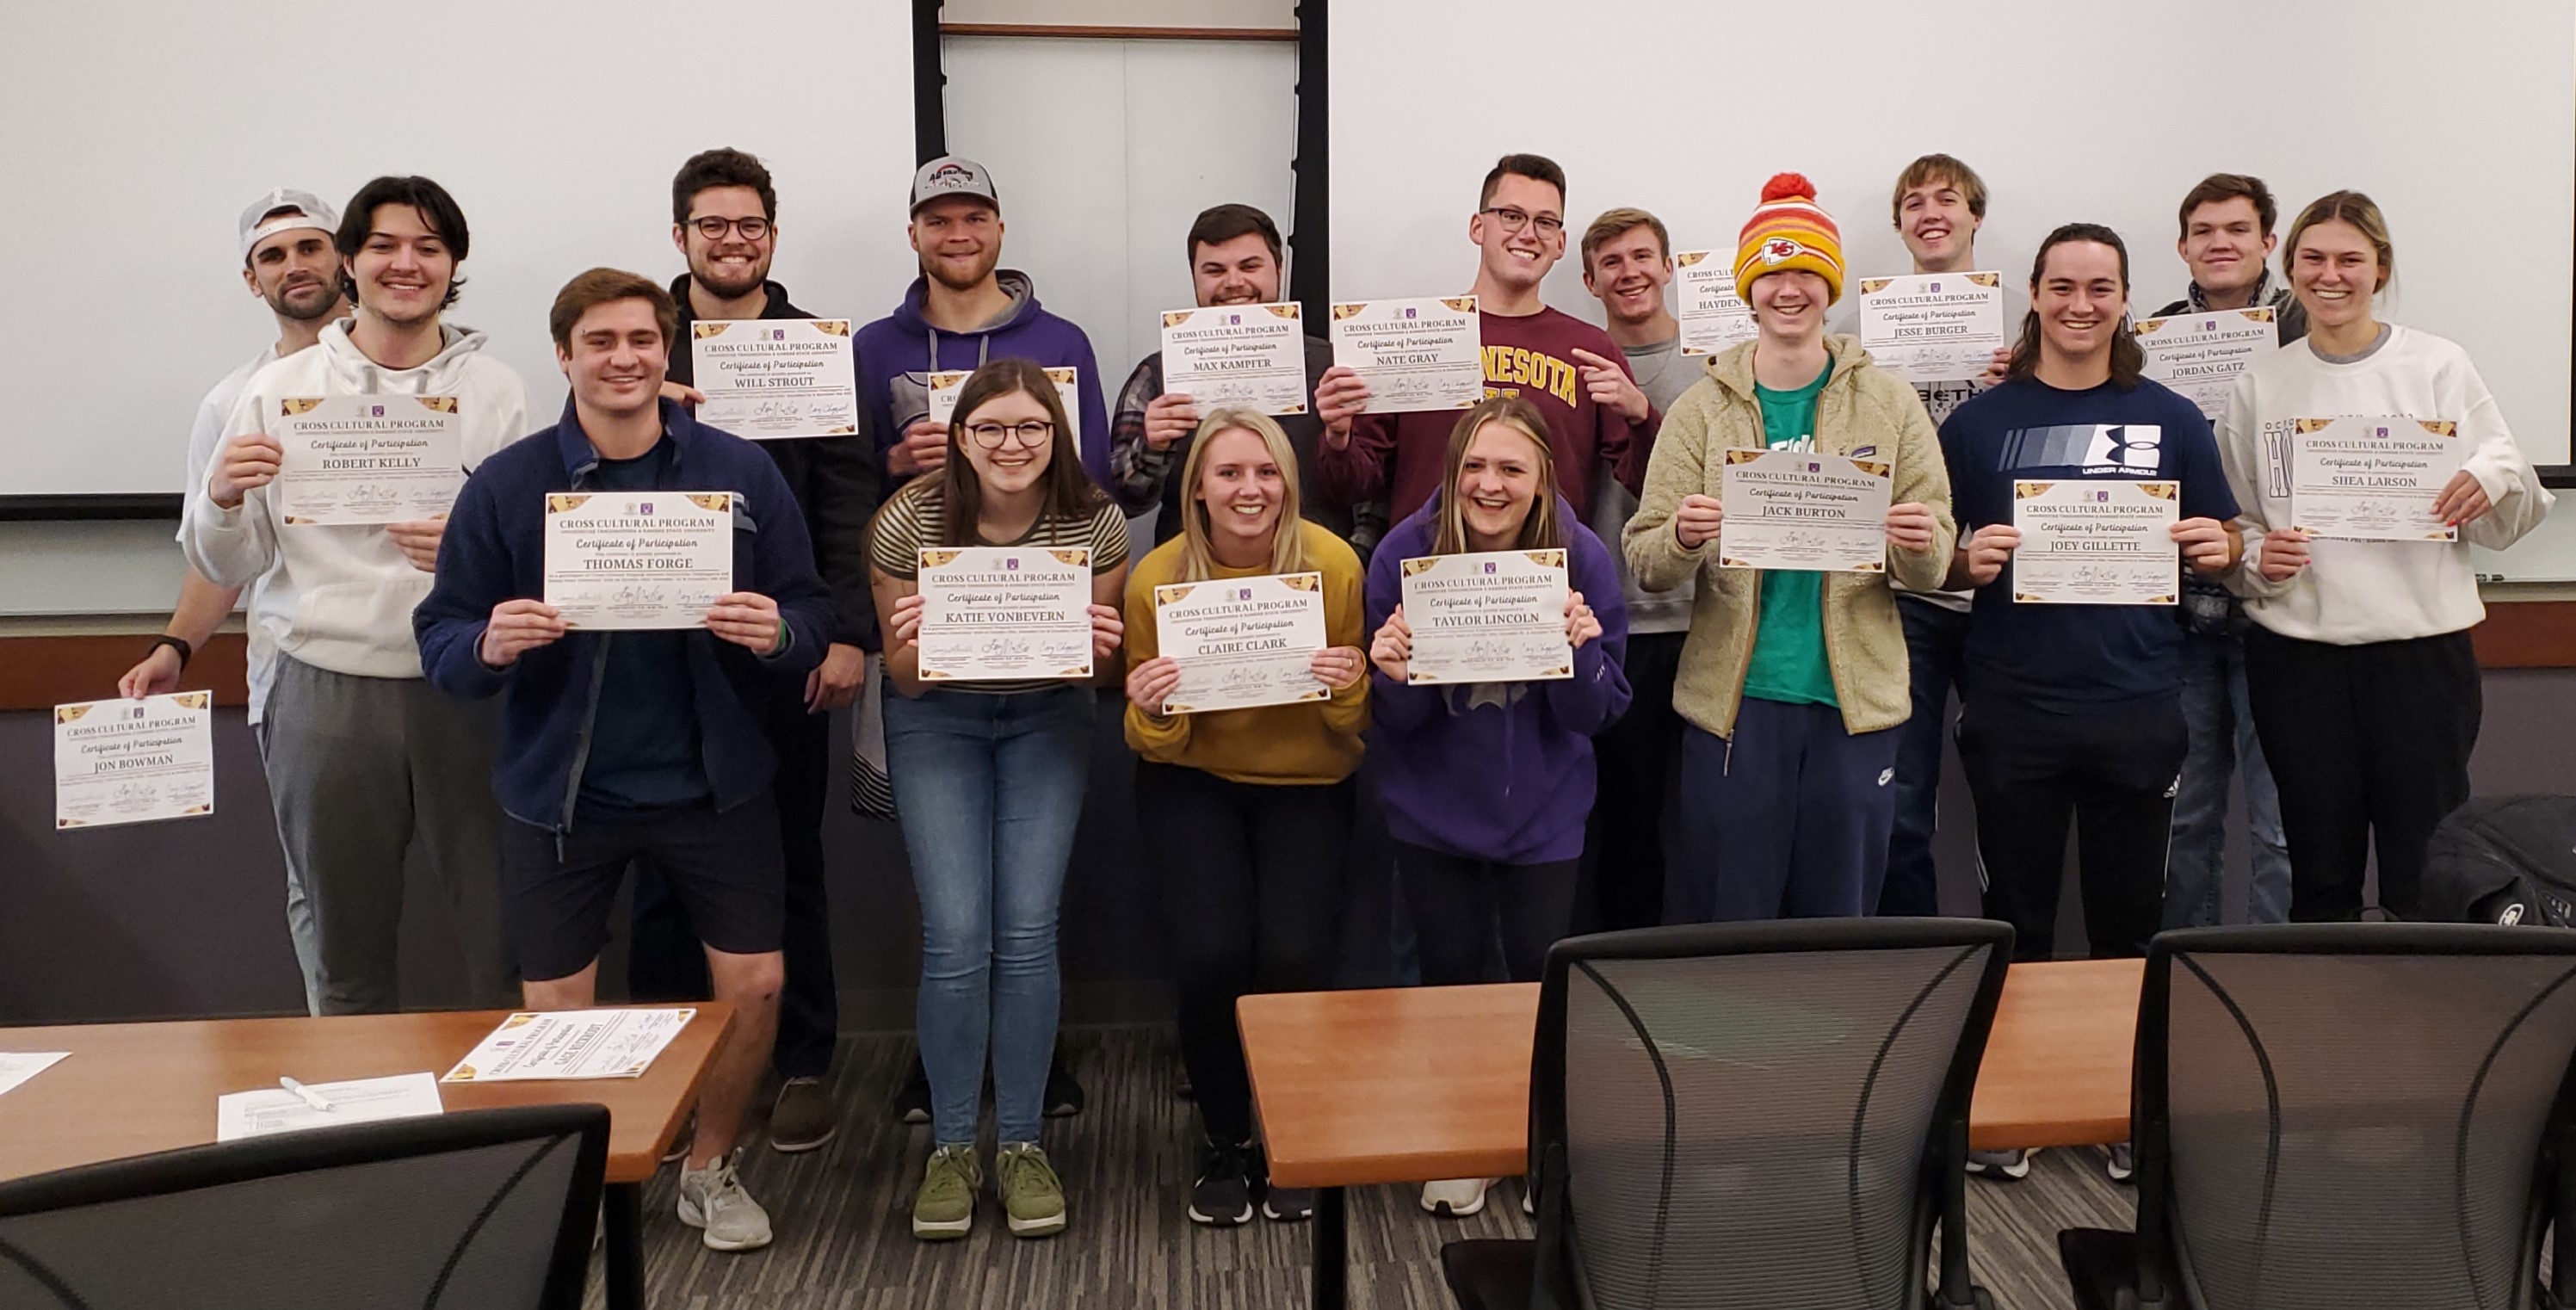 Dr. Lhuillier's College of Business students display certificates